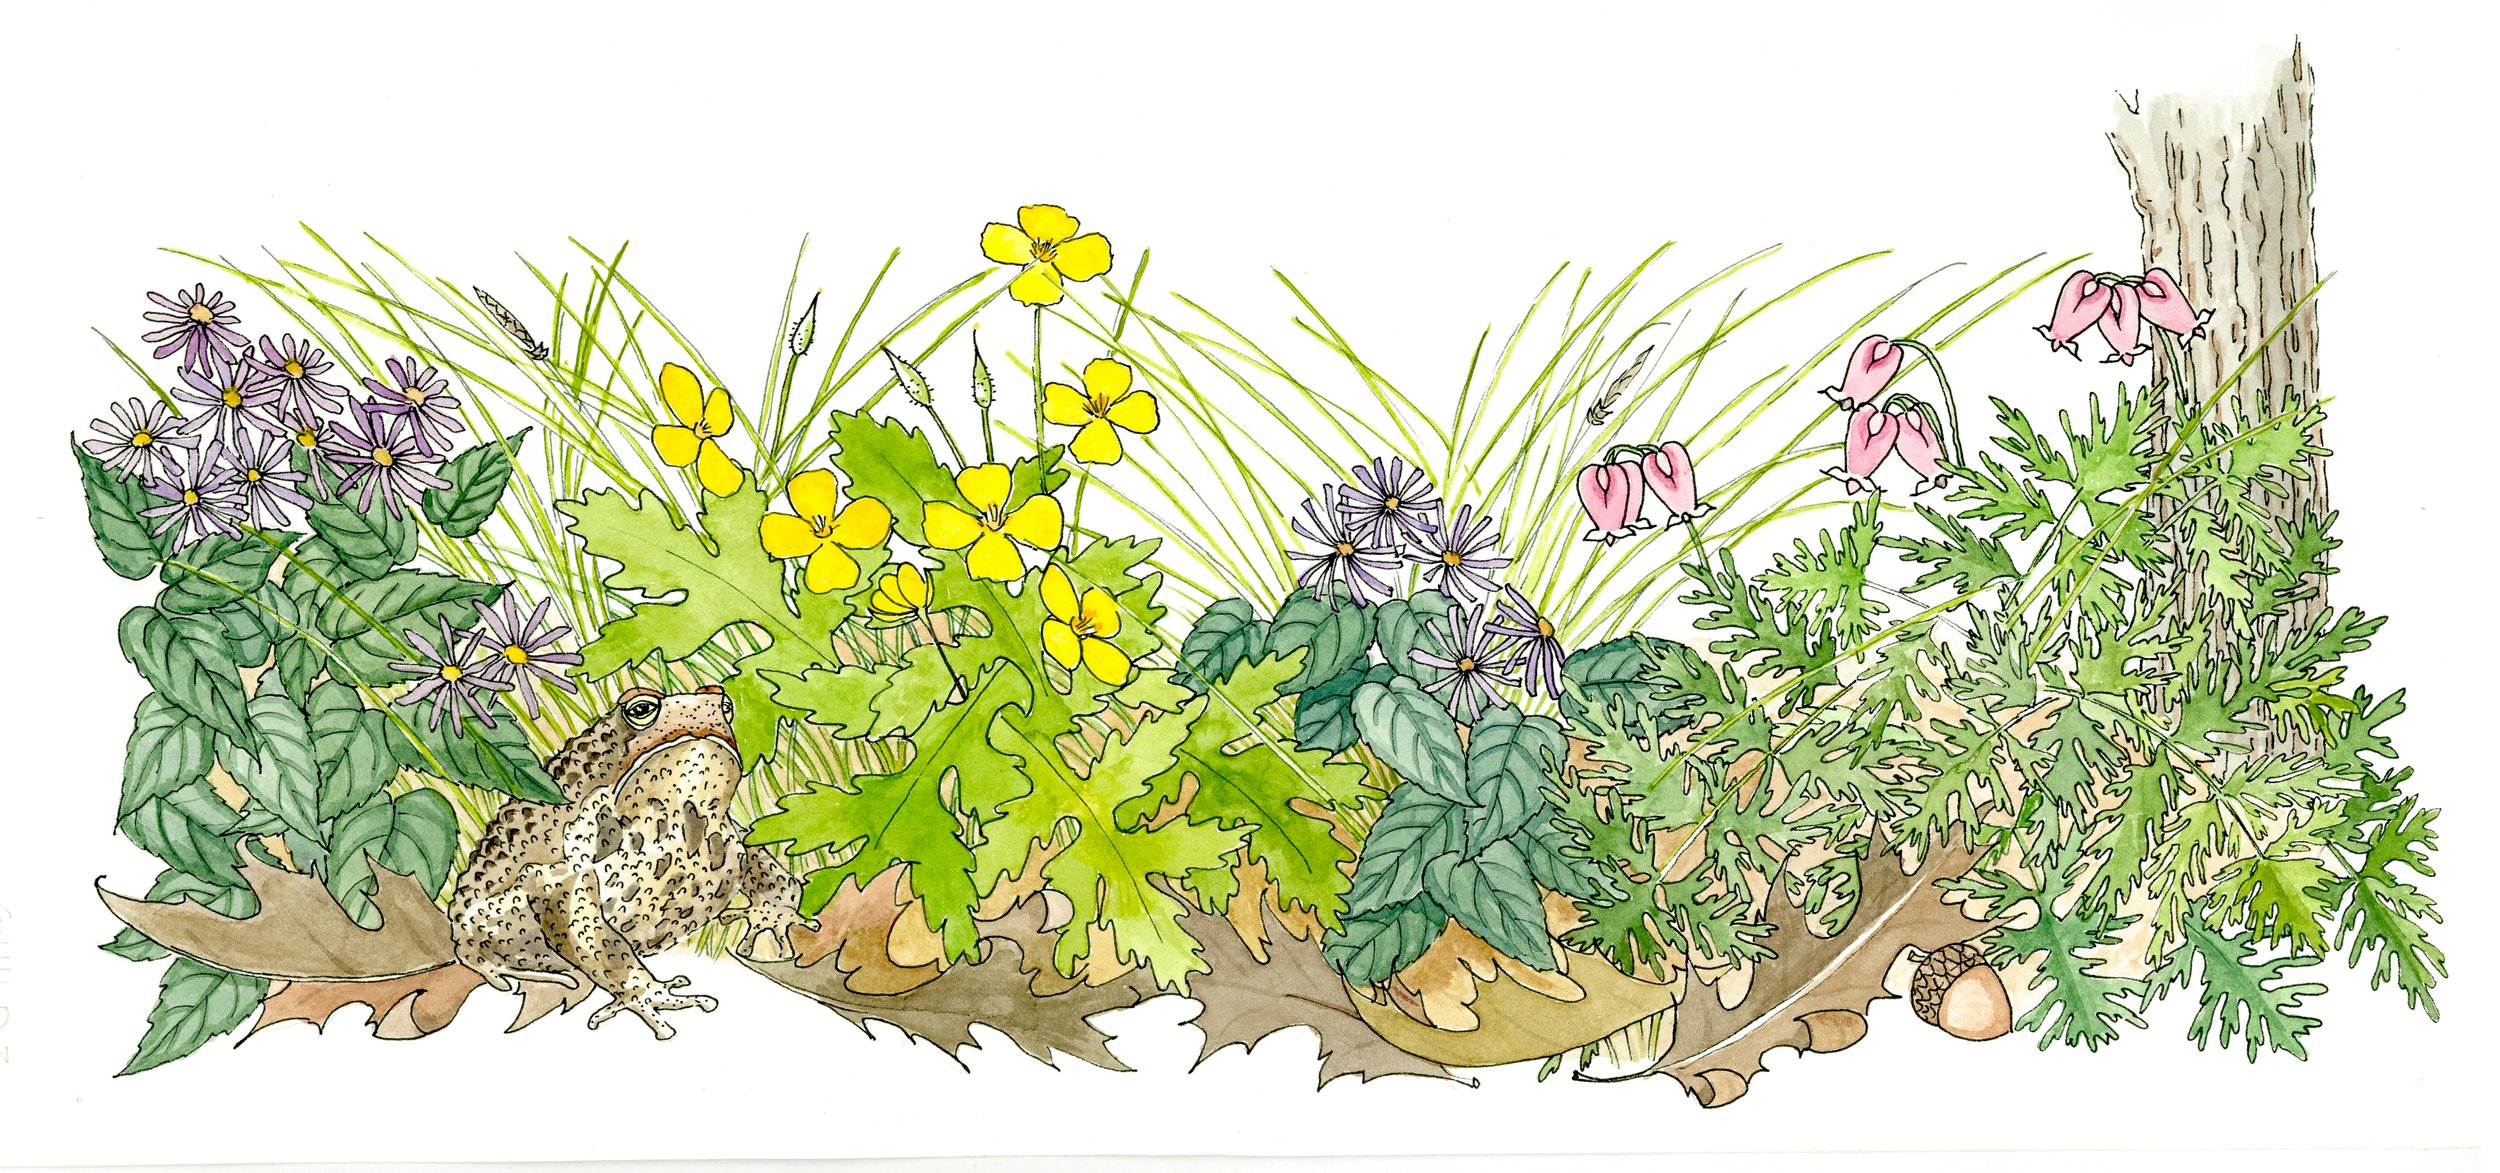 Inside illustration for Native Ground Covers